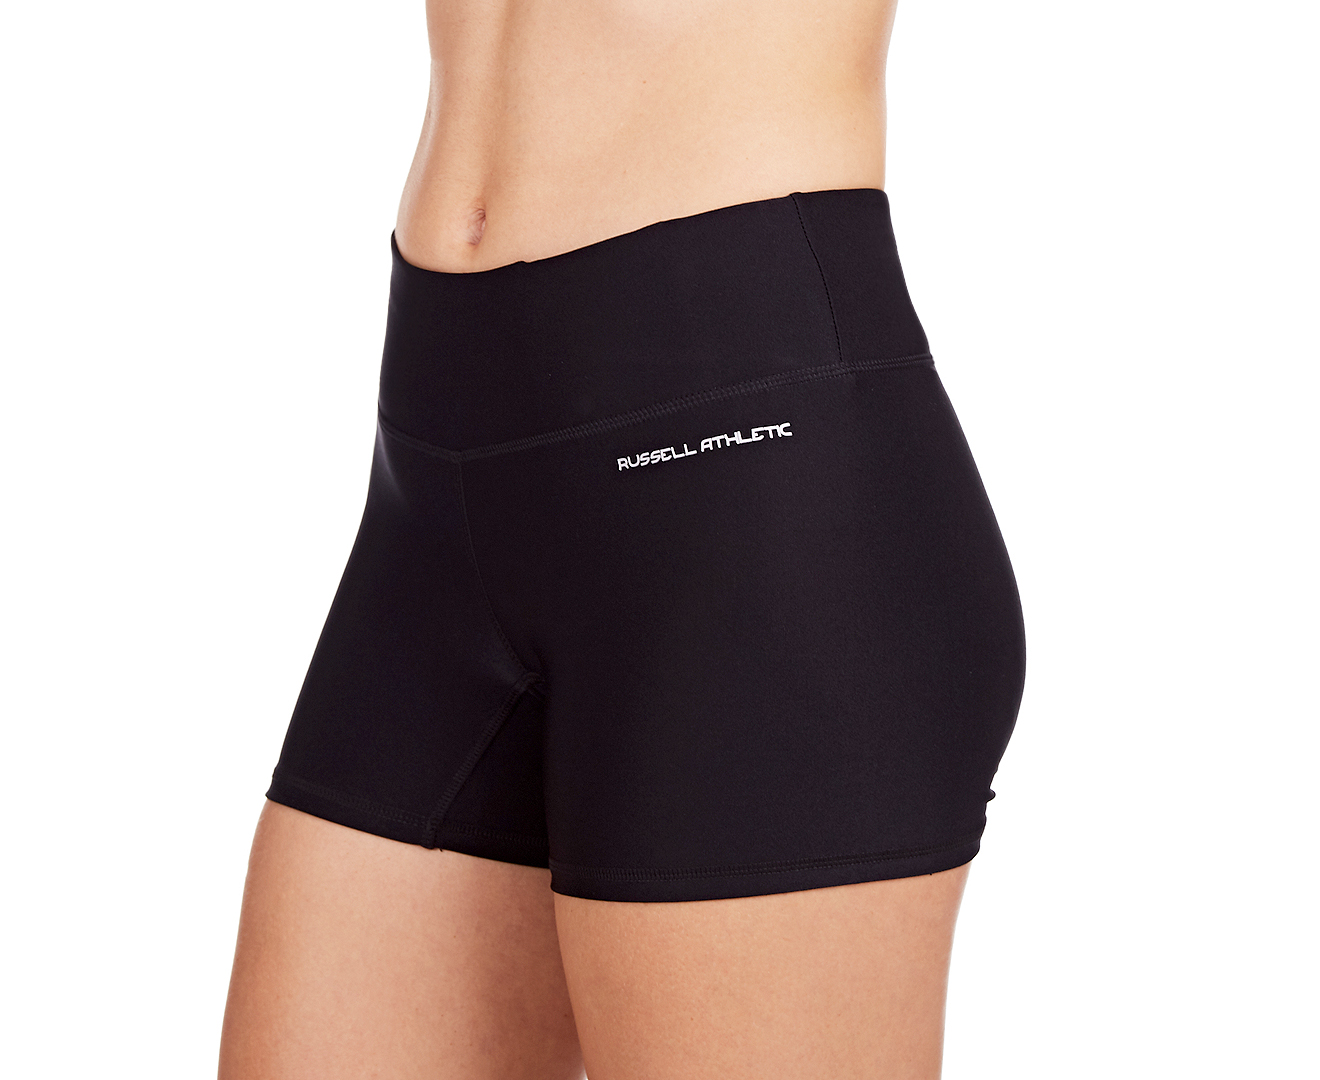 Russell Athletic Women's Platinum Short - Black | Great daily deals at ...